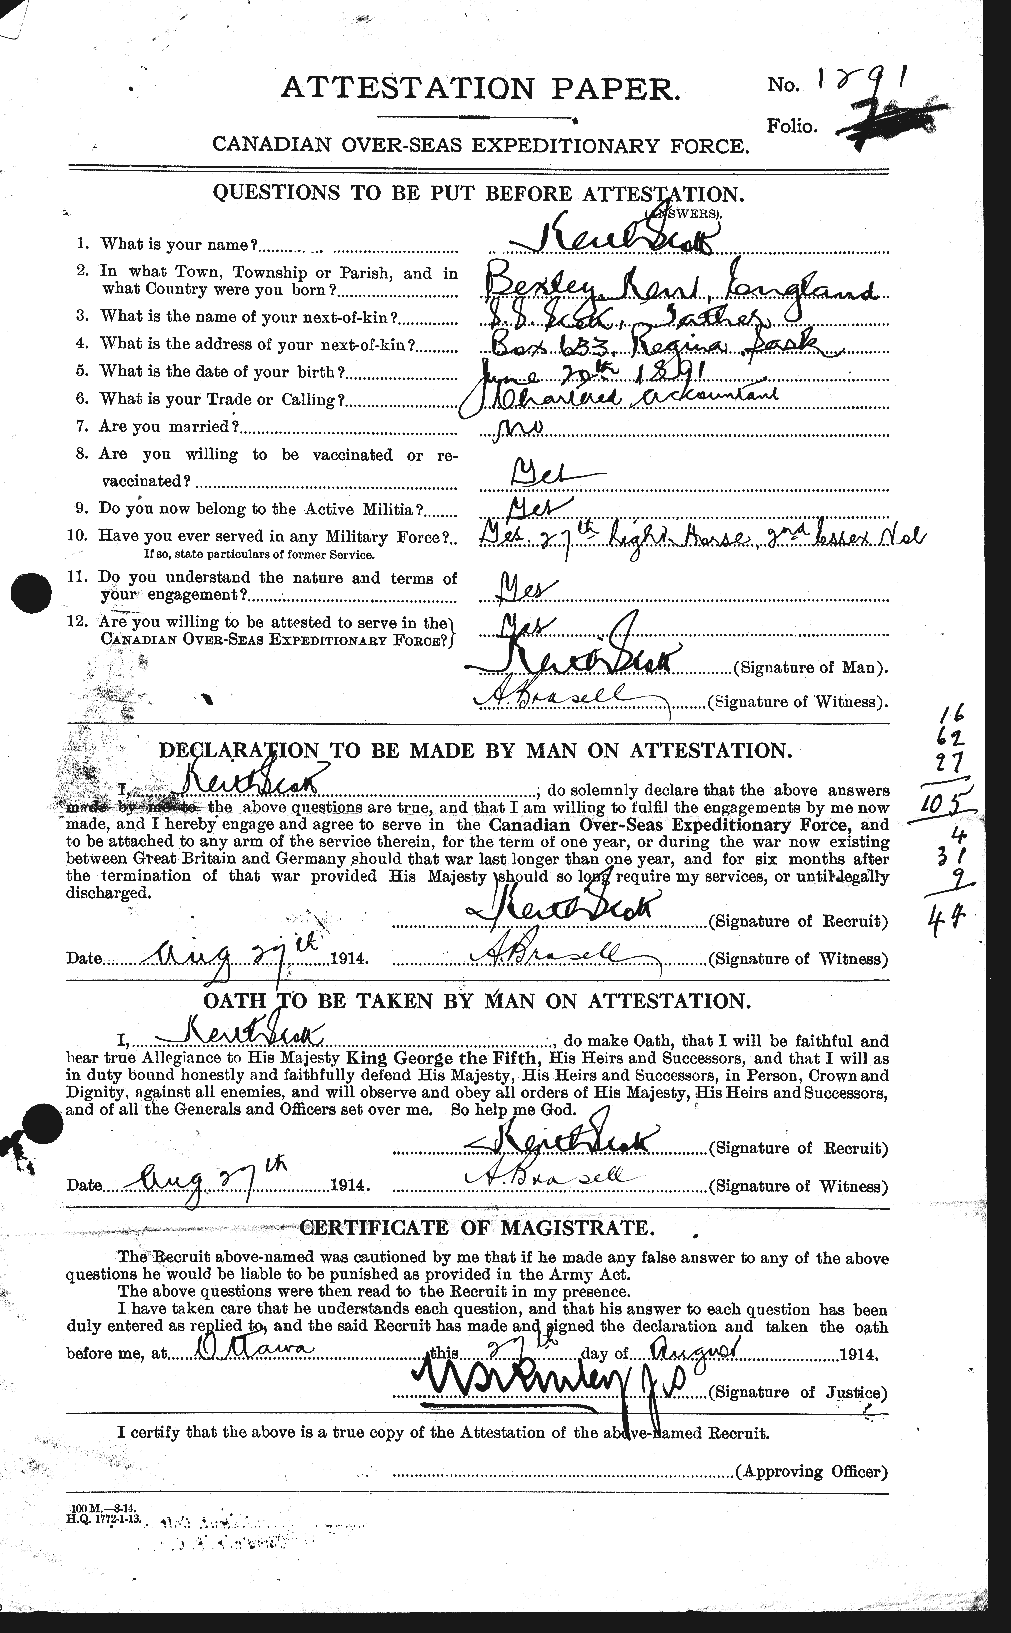 Personnel Records of the First World War - CEF 084156a